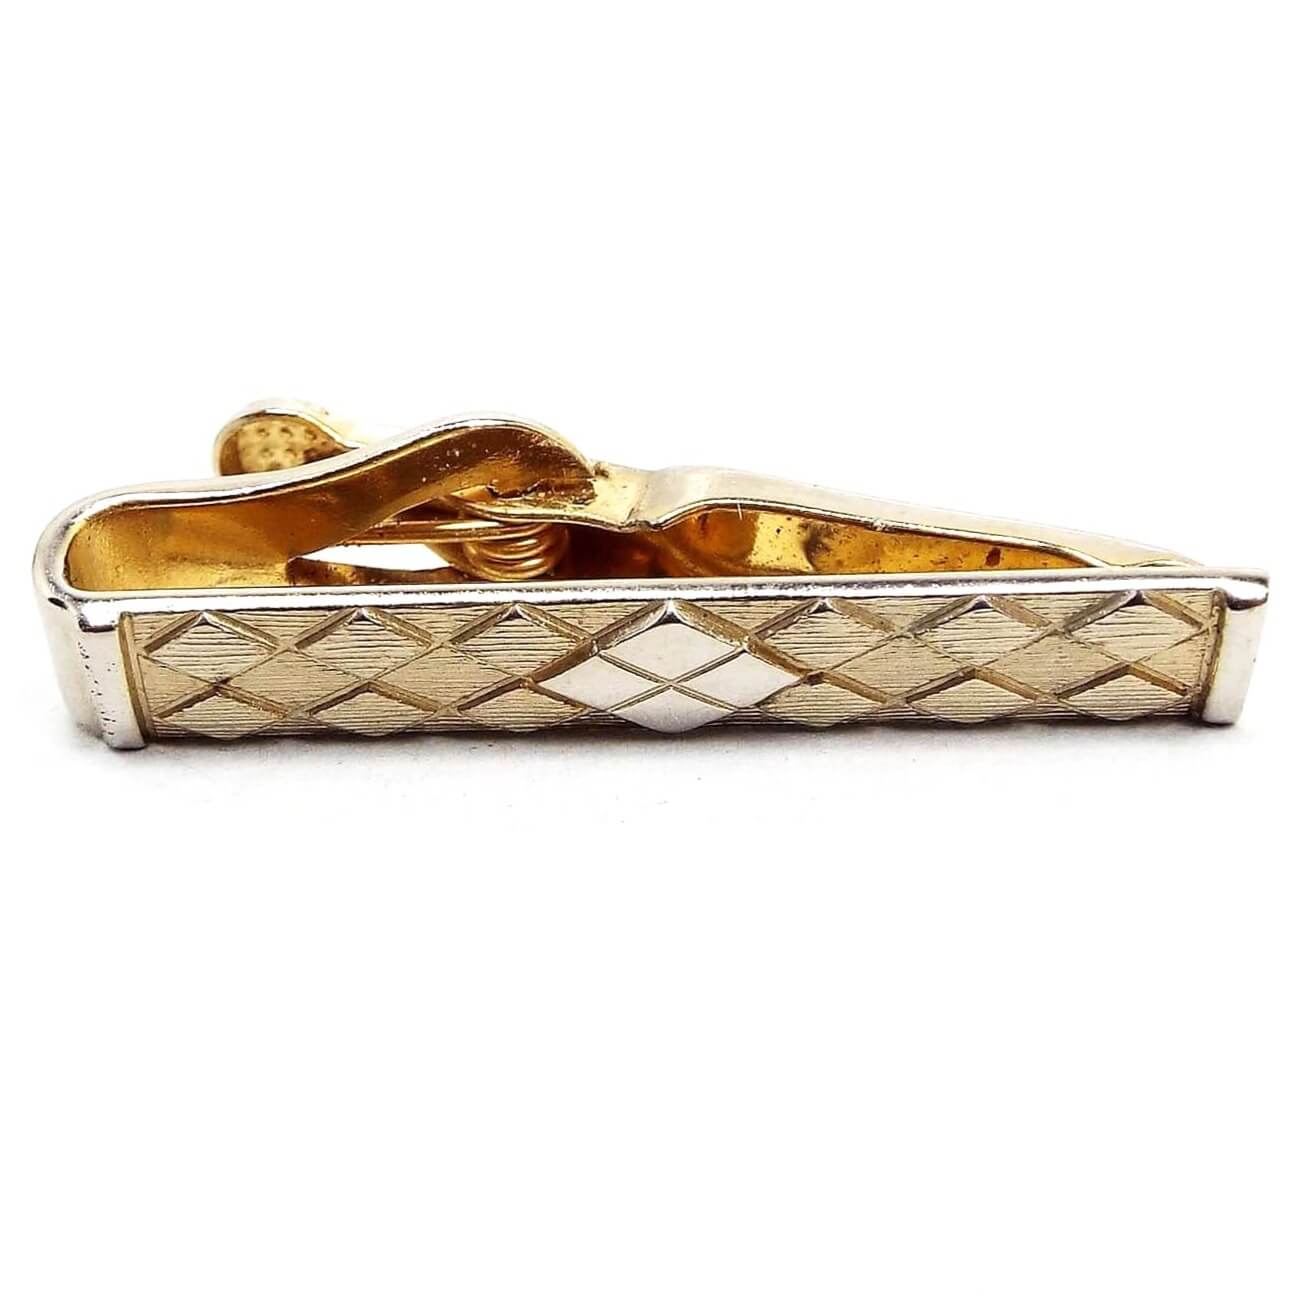 Front view of the Mid Century vintage small Swank tie clip. It is gold tone in color. The front has a diamond pattern design with textured matte gold tone color. The very middle has four diamond shapes making up a larger diamond shape and is shiny gold tone in color.